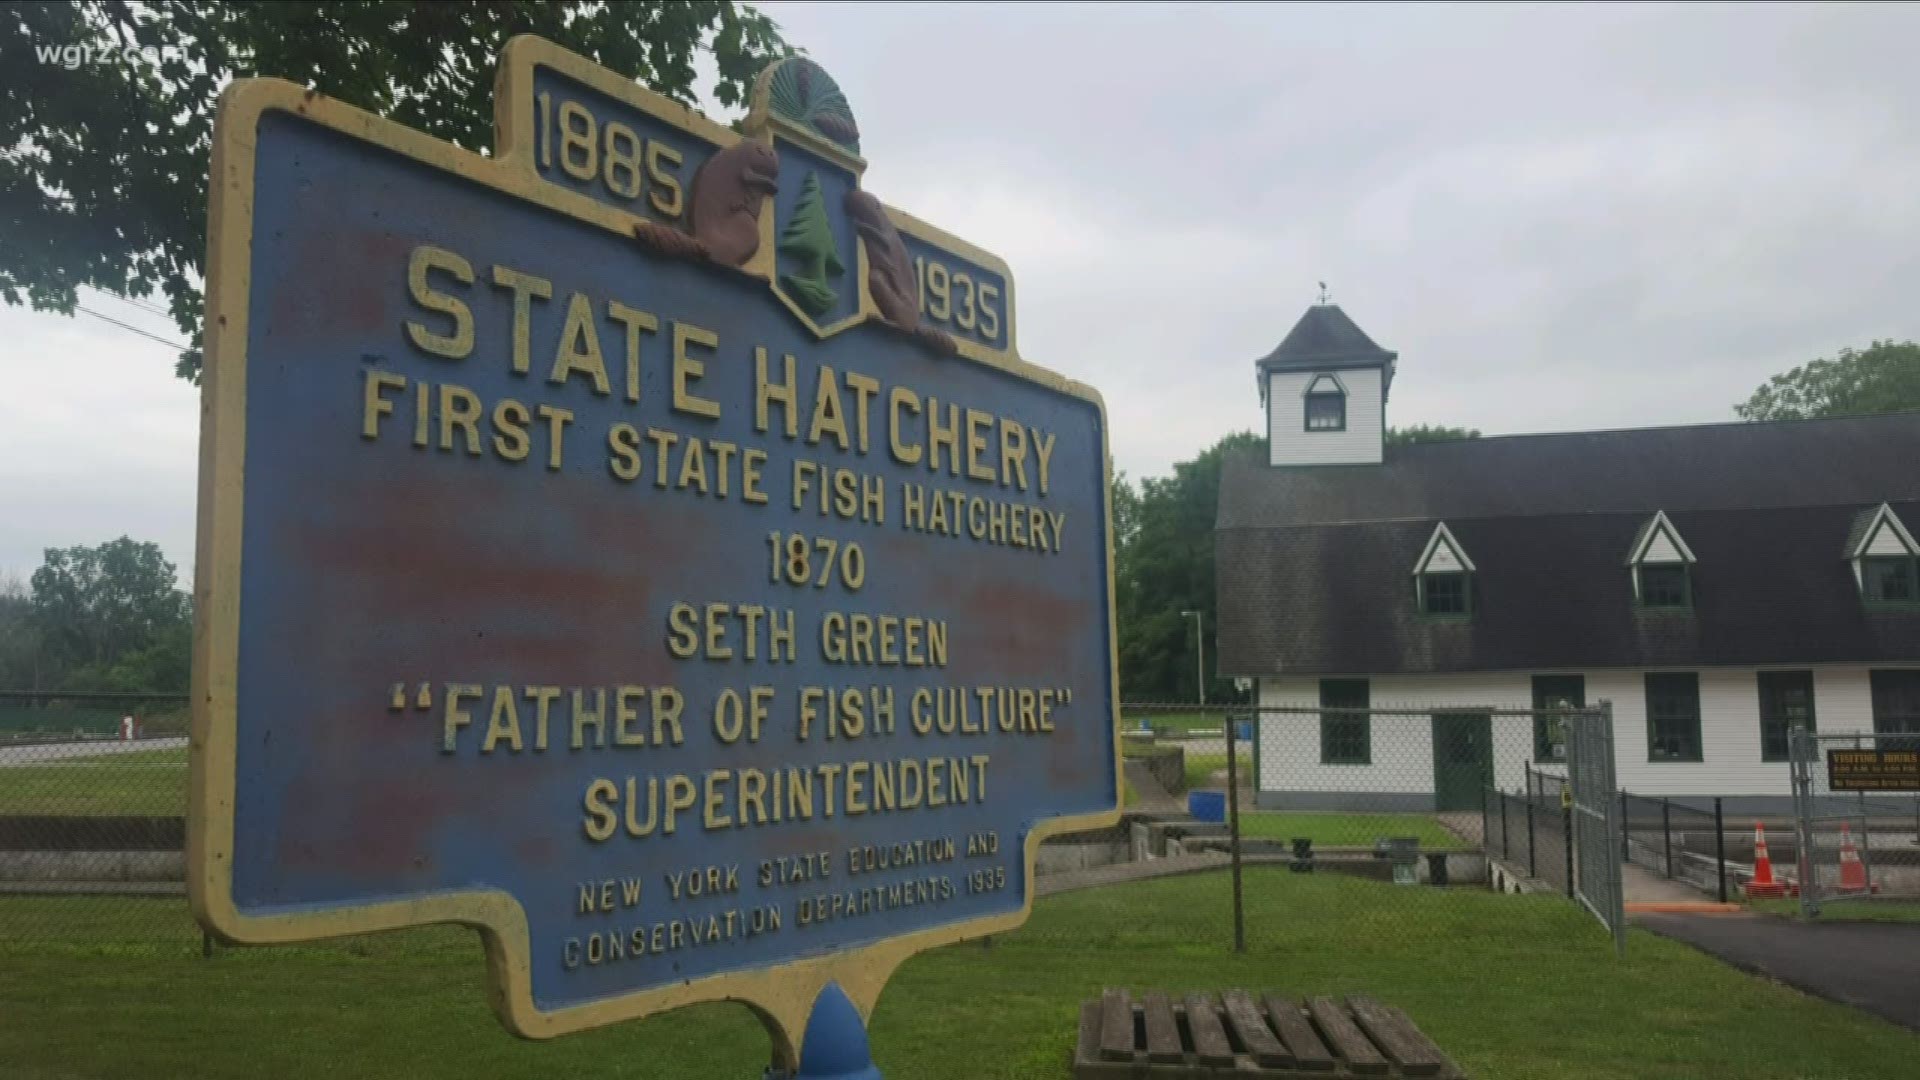 The Caledonia Fish Hatchery produces 90% of the Brown Trout released in New York.